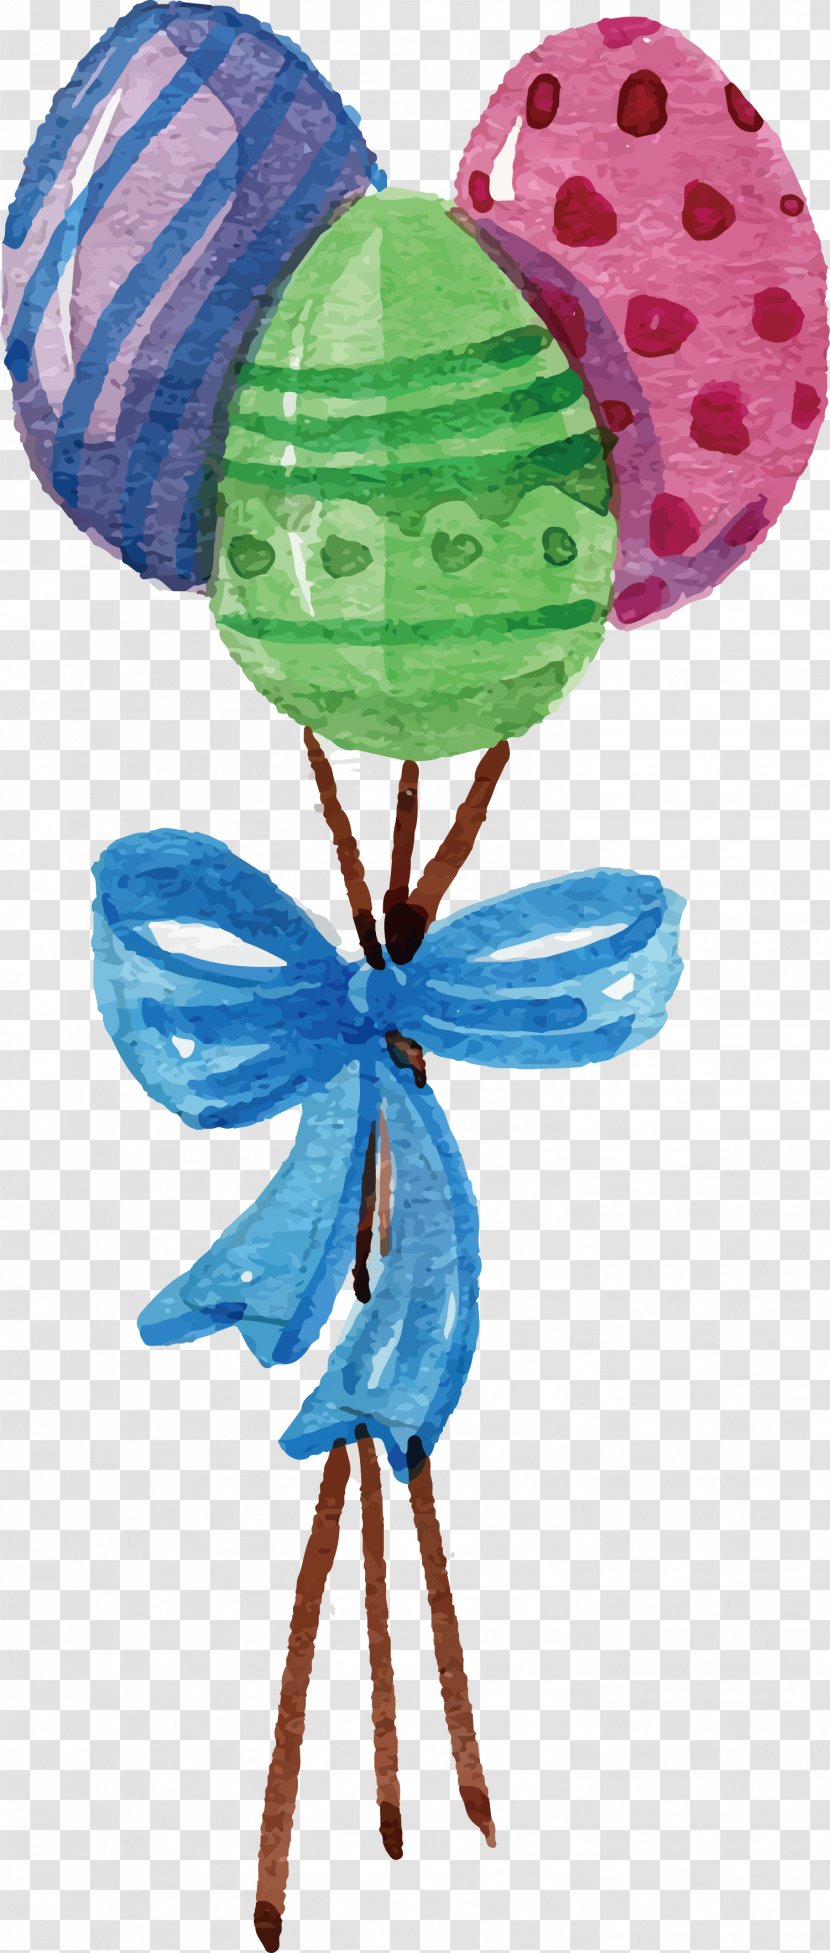 Easter Bunny Egg Watercolor Painting - Balloon Transparent PNG